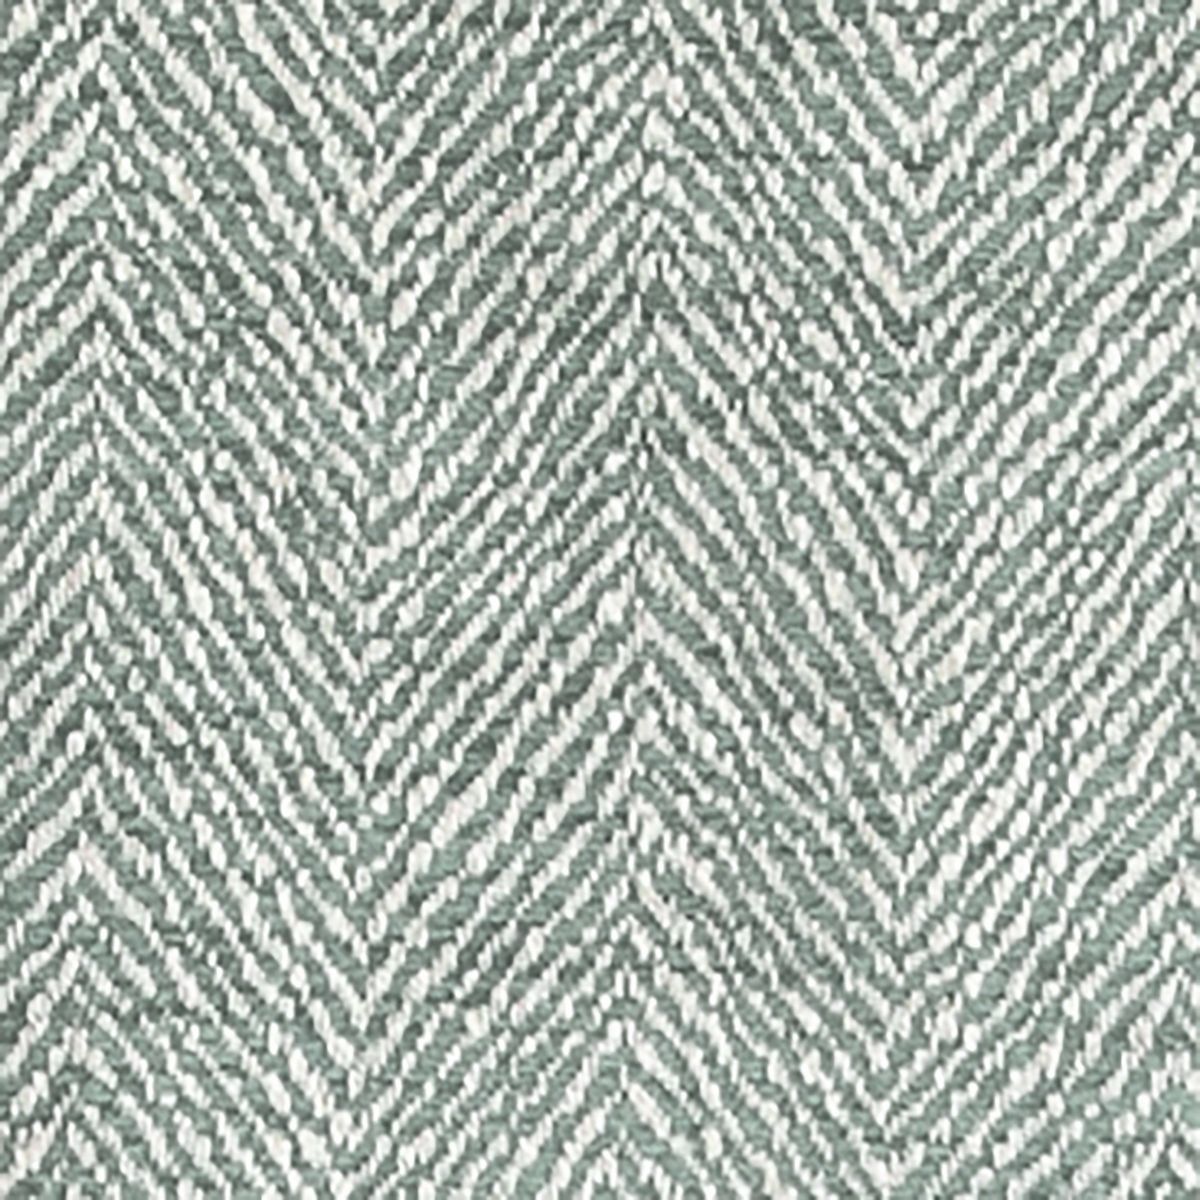 Oryx Duck Egg Fabric by Voyage Maison